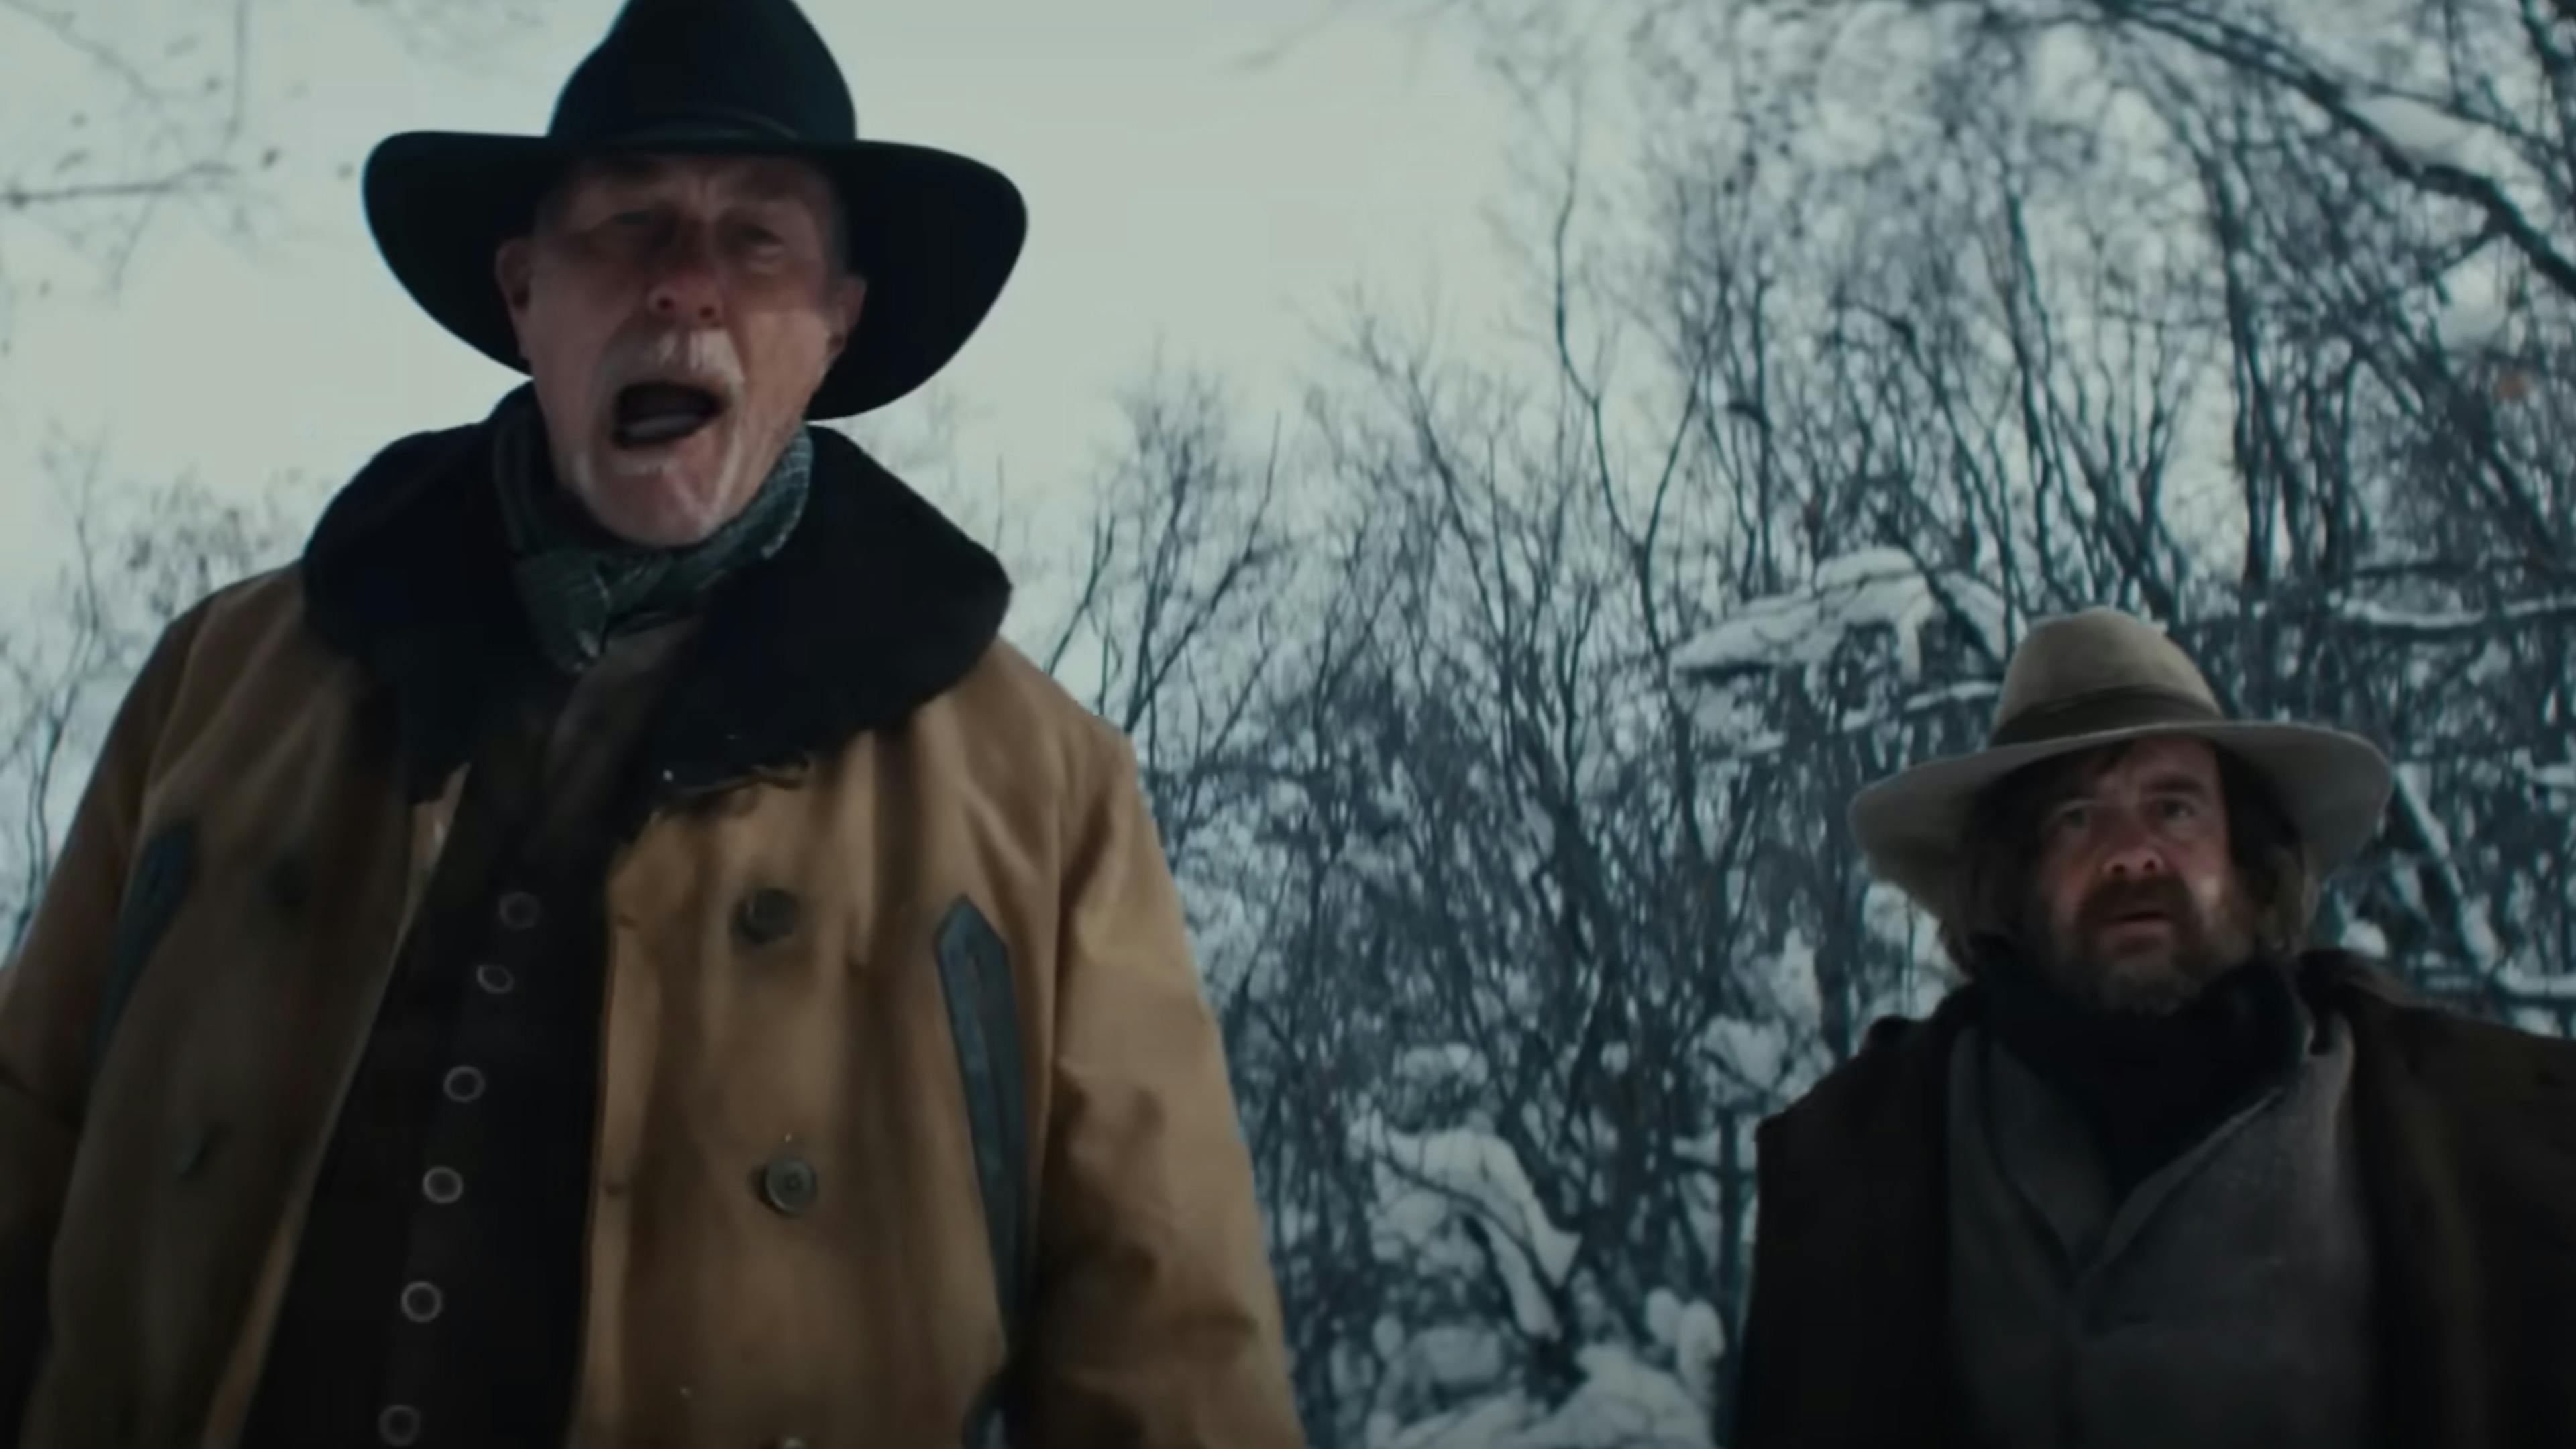 Watch Metallica’s James Hetfield in the trailer for new western movie The Thicket